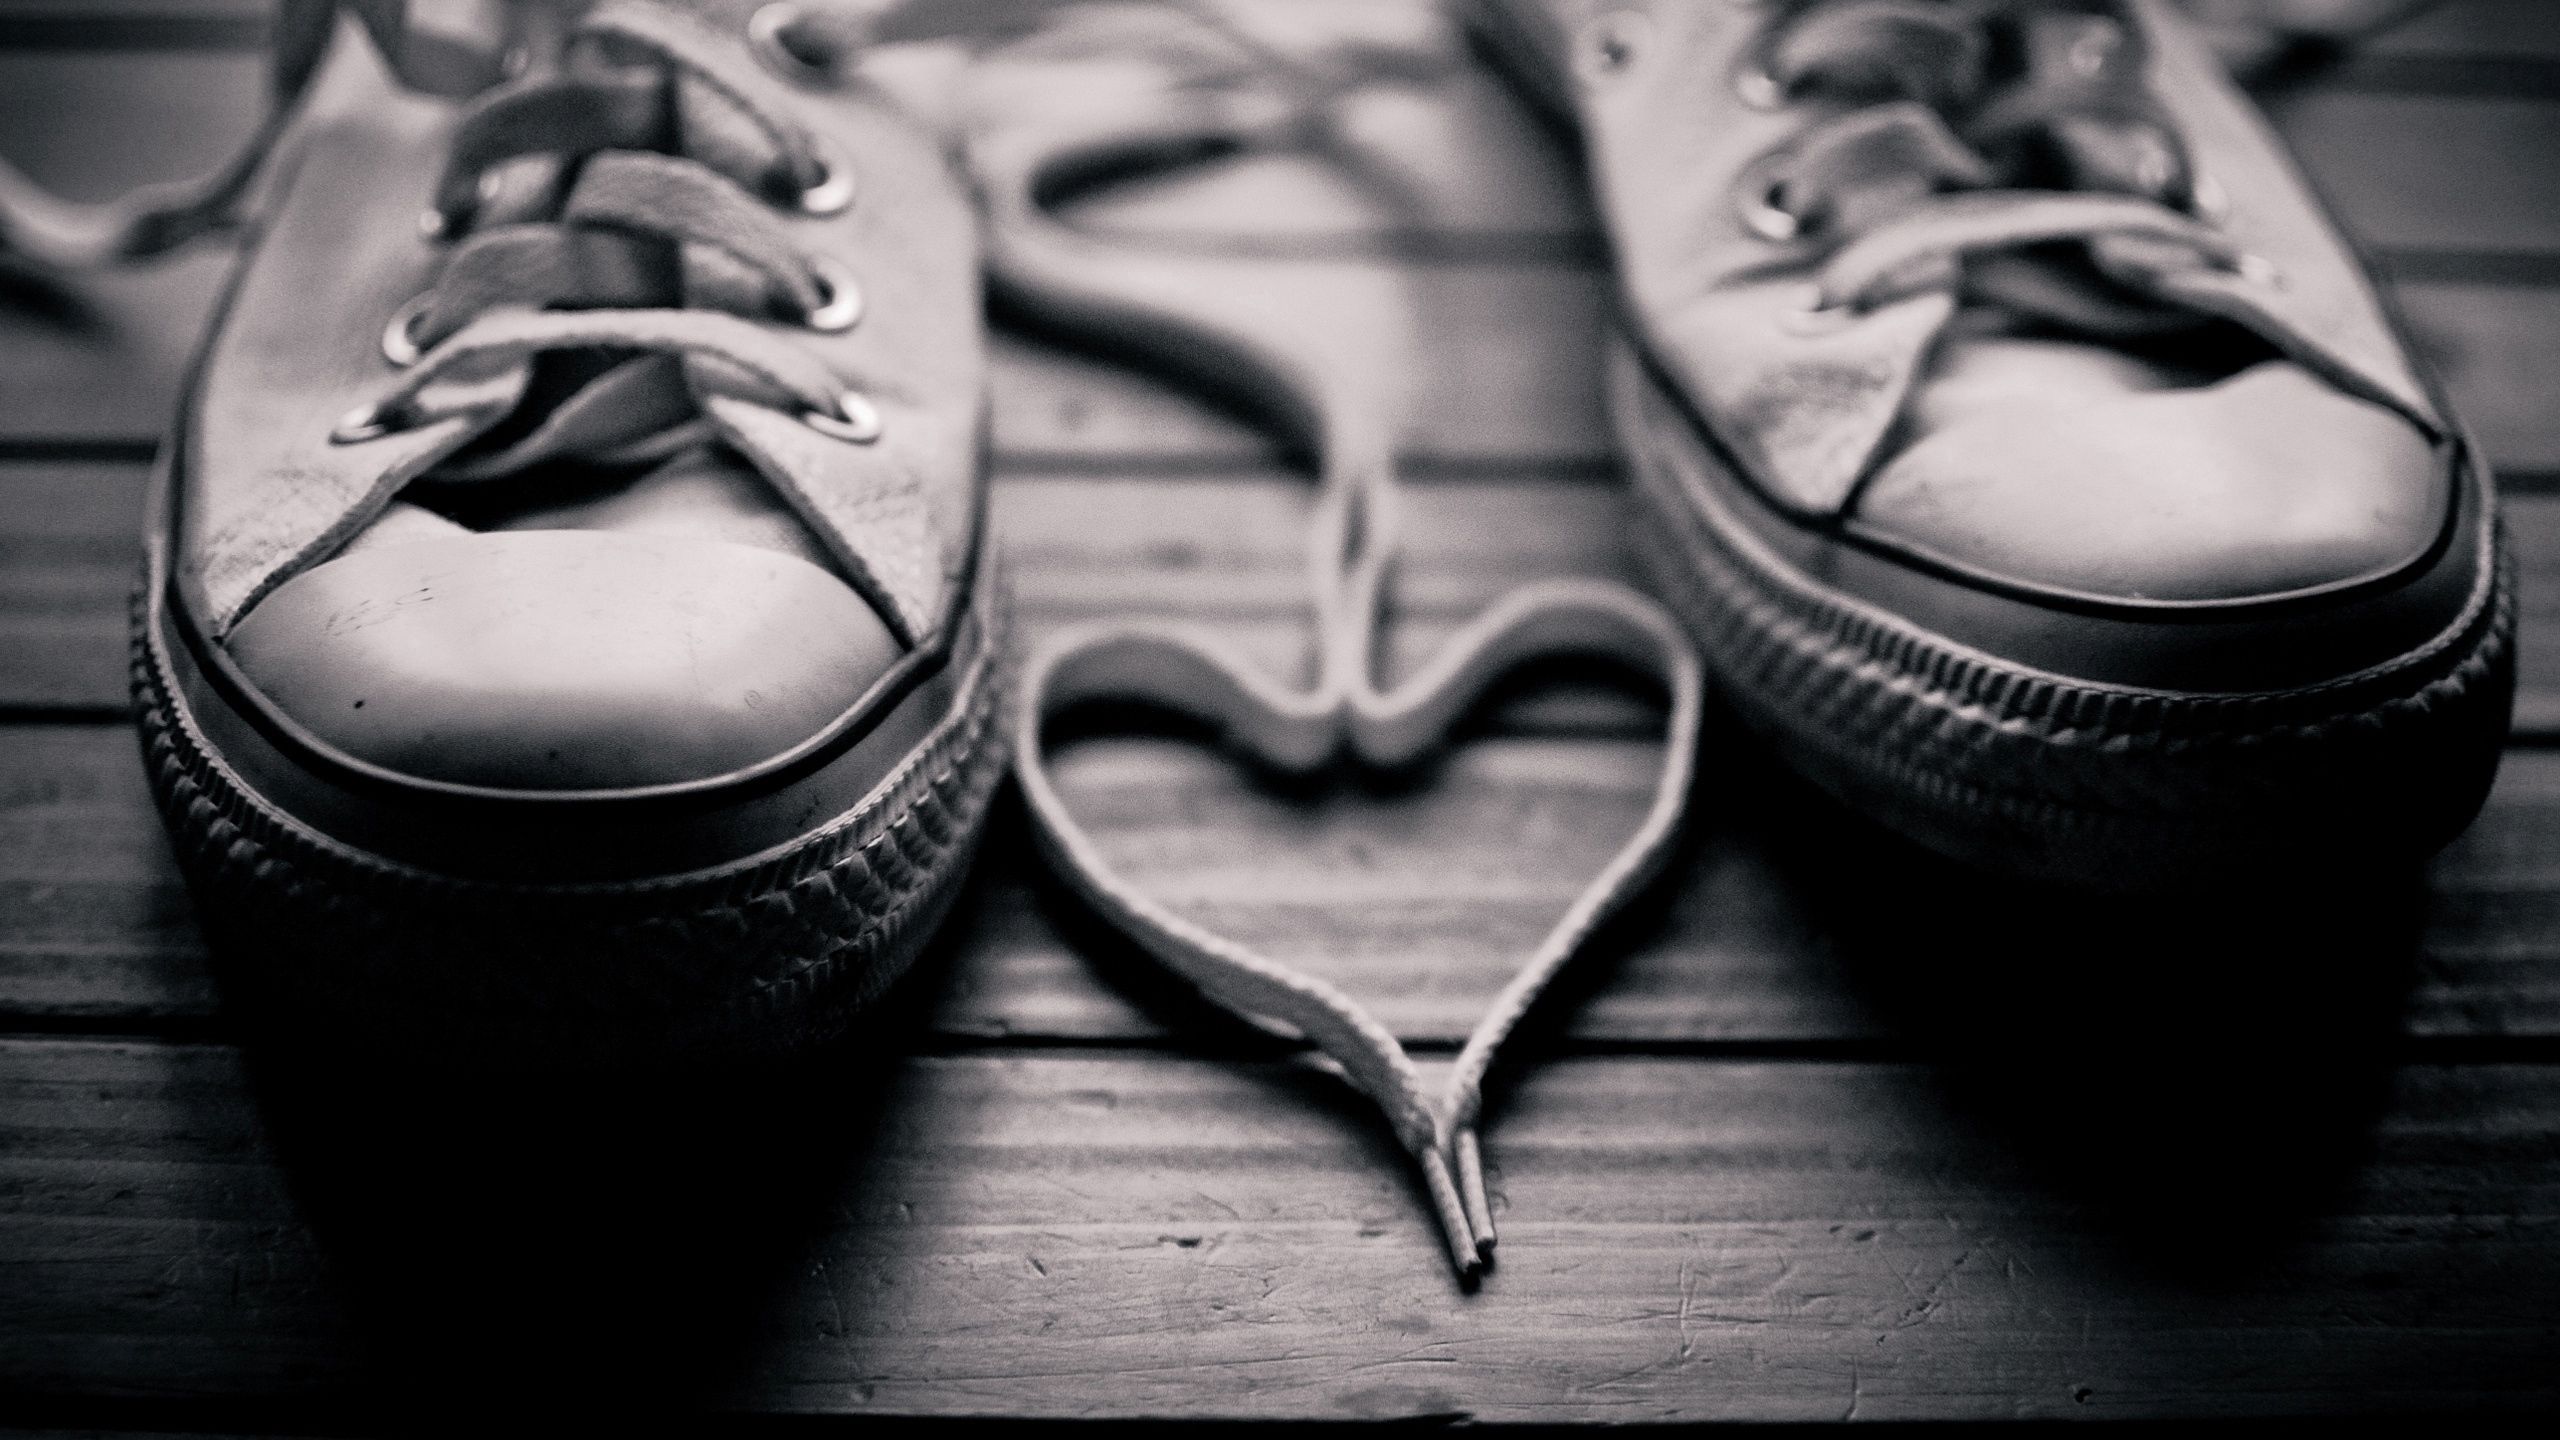 Download wallpaper 2560x1440 shoes, shoe laces, black white, sepia, mood widescreen 16:9 HD background